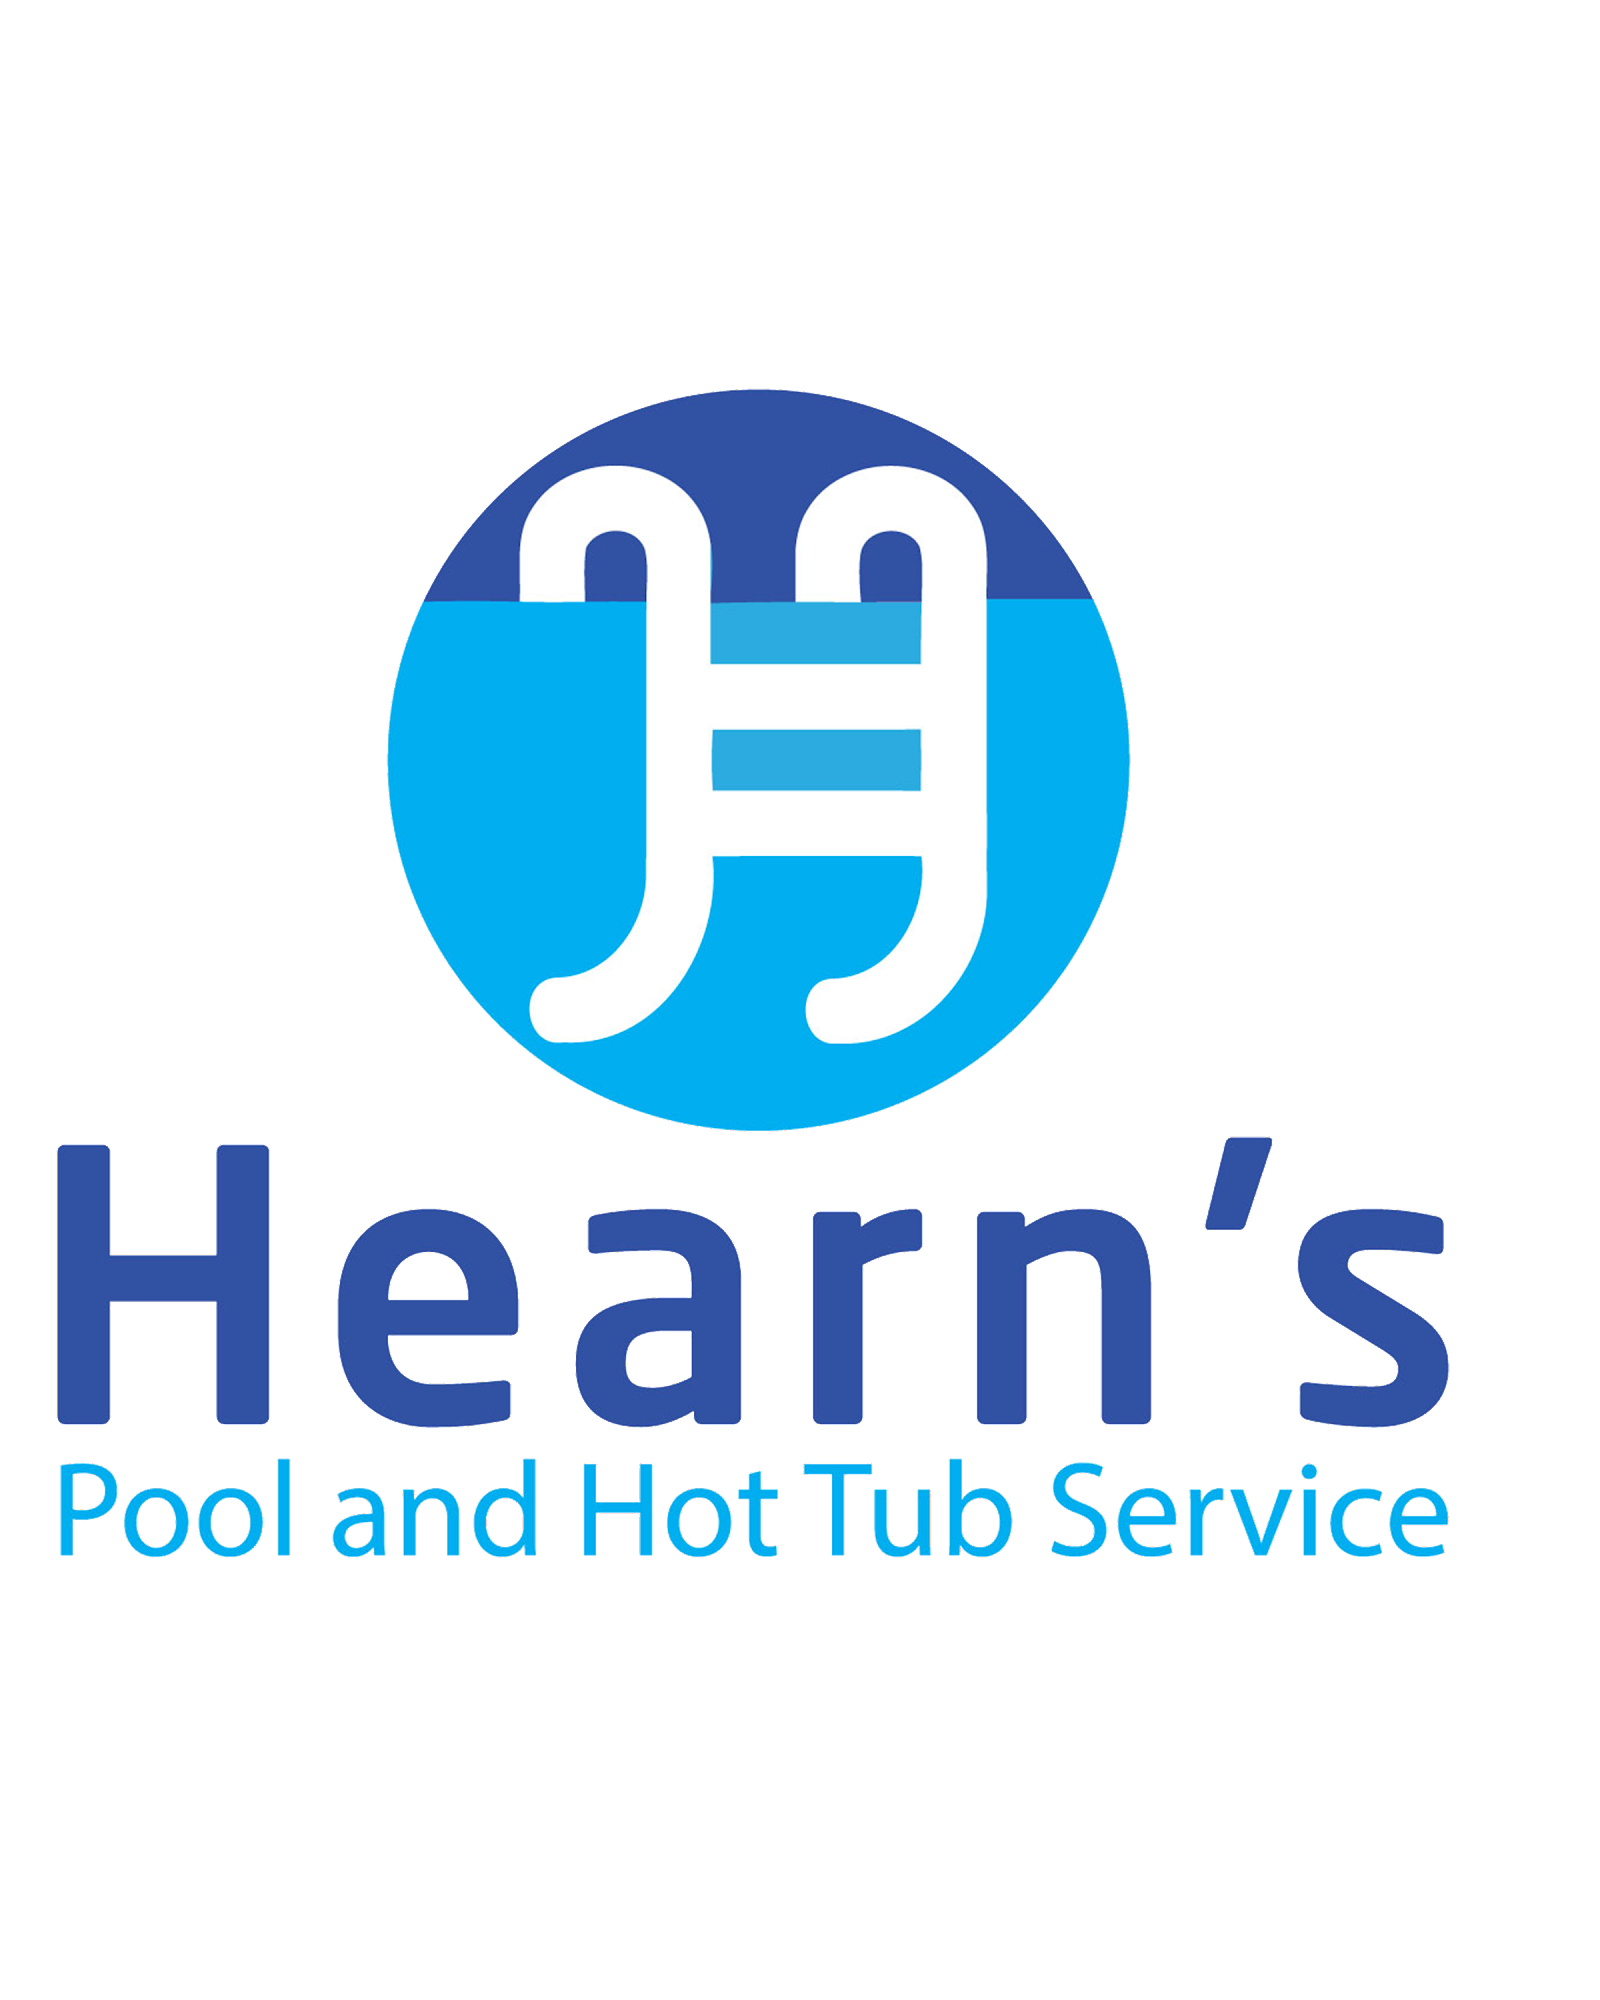 Hearn's Pool and Hot Tub Service 13353 Shiloh Church Rd, Laurel Delaware 19956